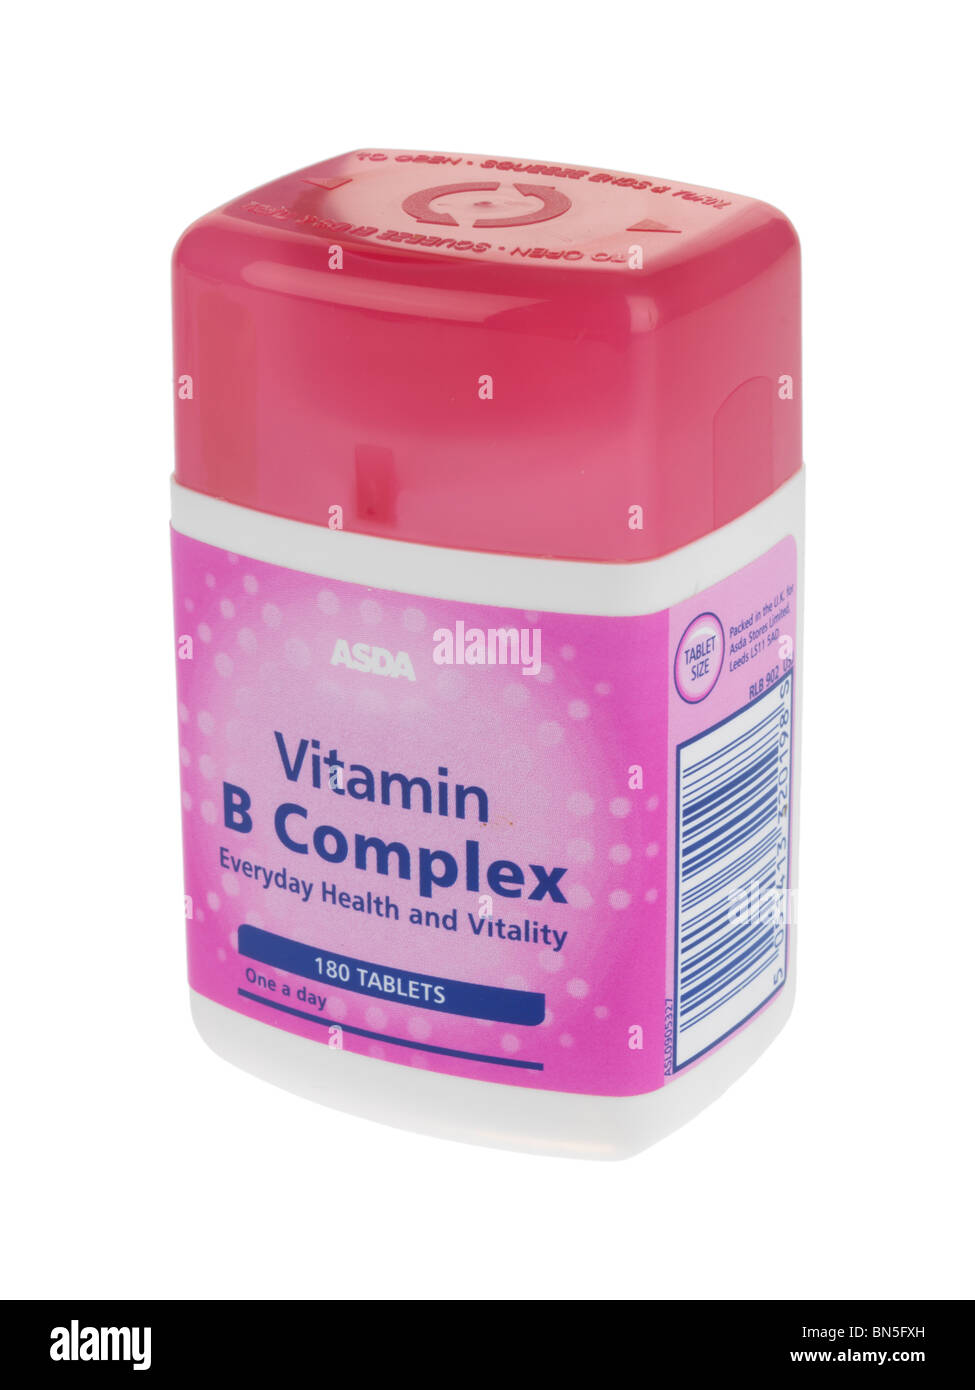 Vitamine B Complexe Banque D'Images